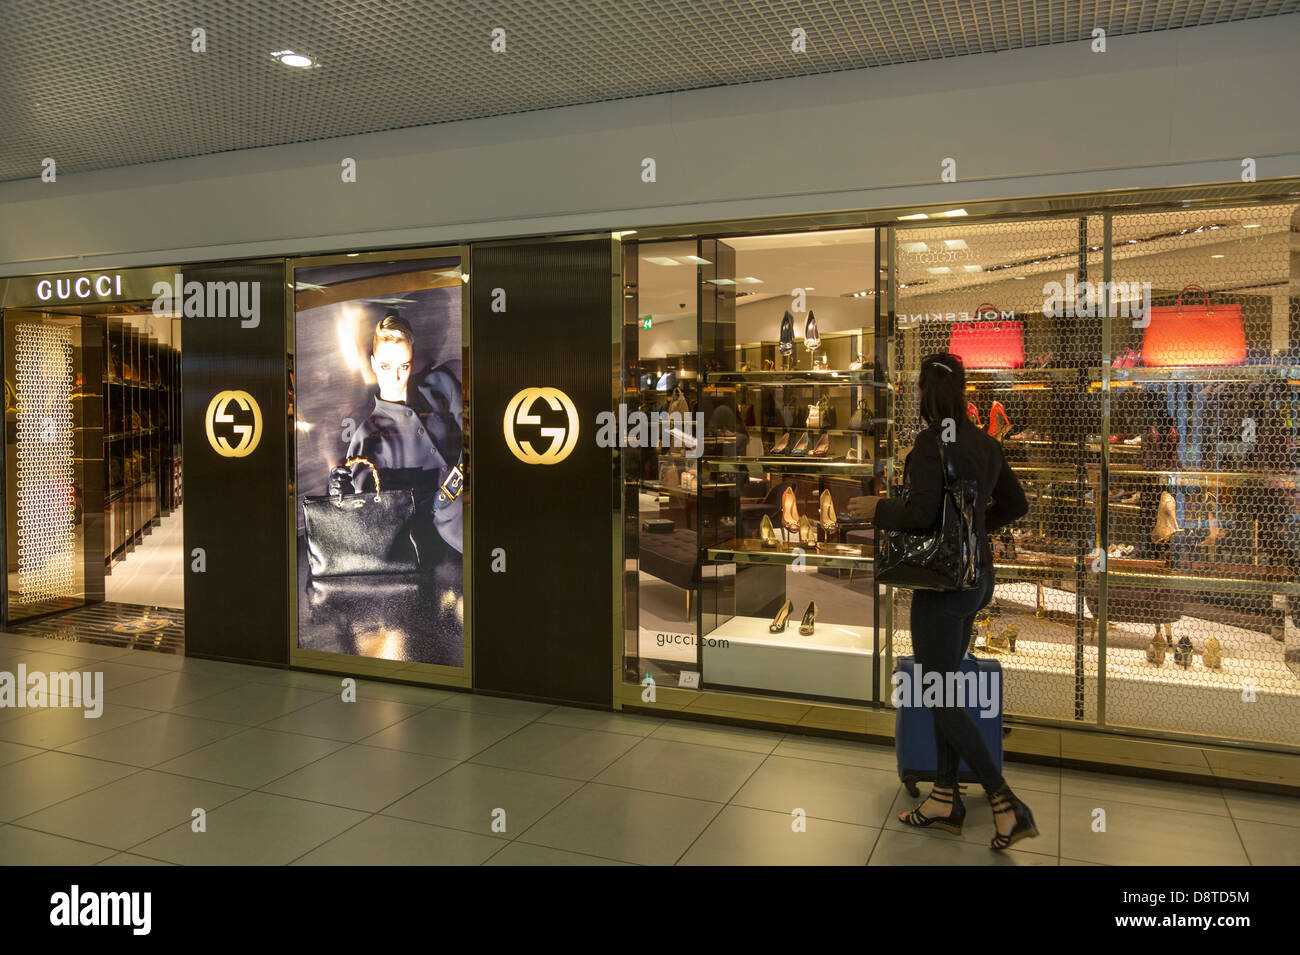 Gucci shop Fiumicino Airport, Rome, Italy Stock Photo, Royalty Free Image: 57085552 - Alamy